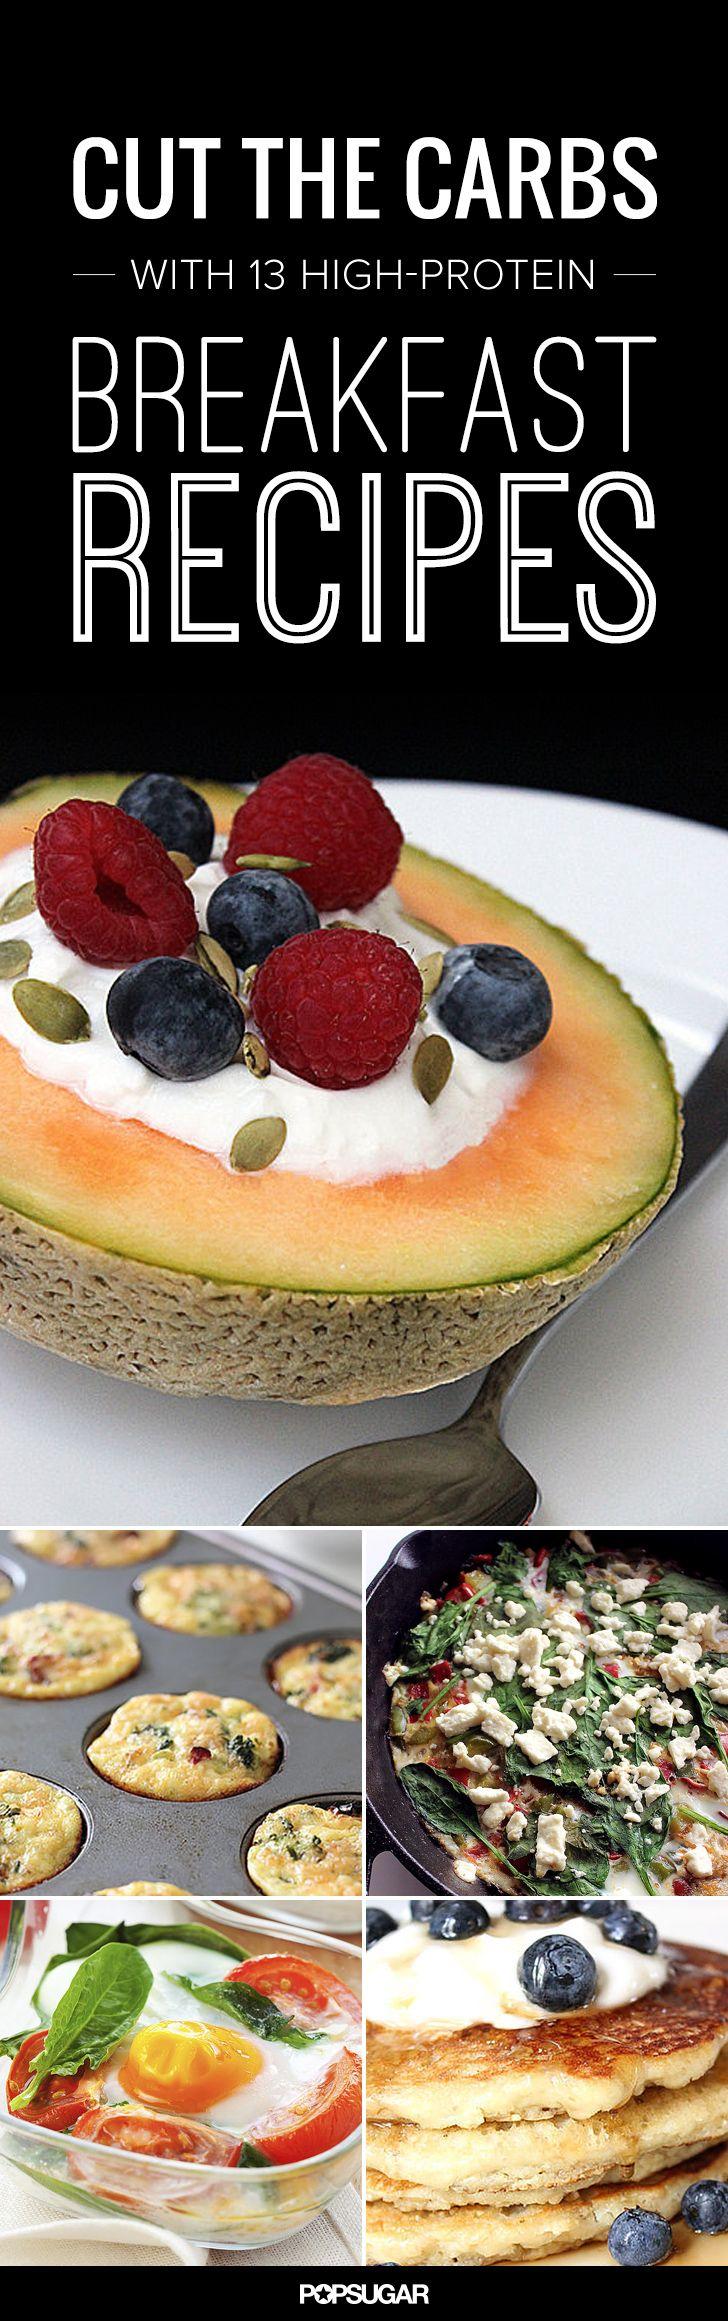 Mariage - 17 High-Protein, Low-Carb Breakfast Ideas For Weight Loss